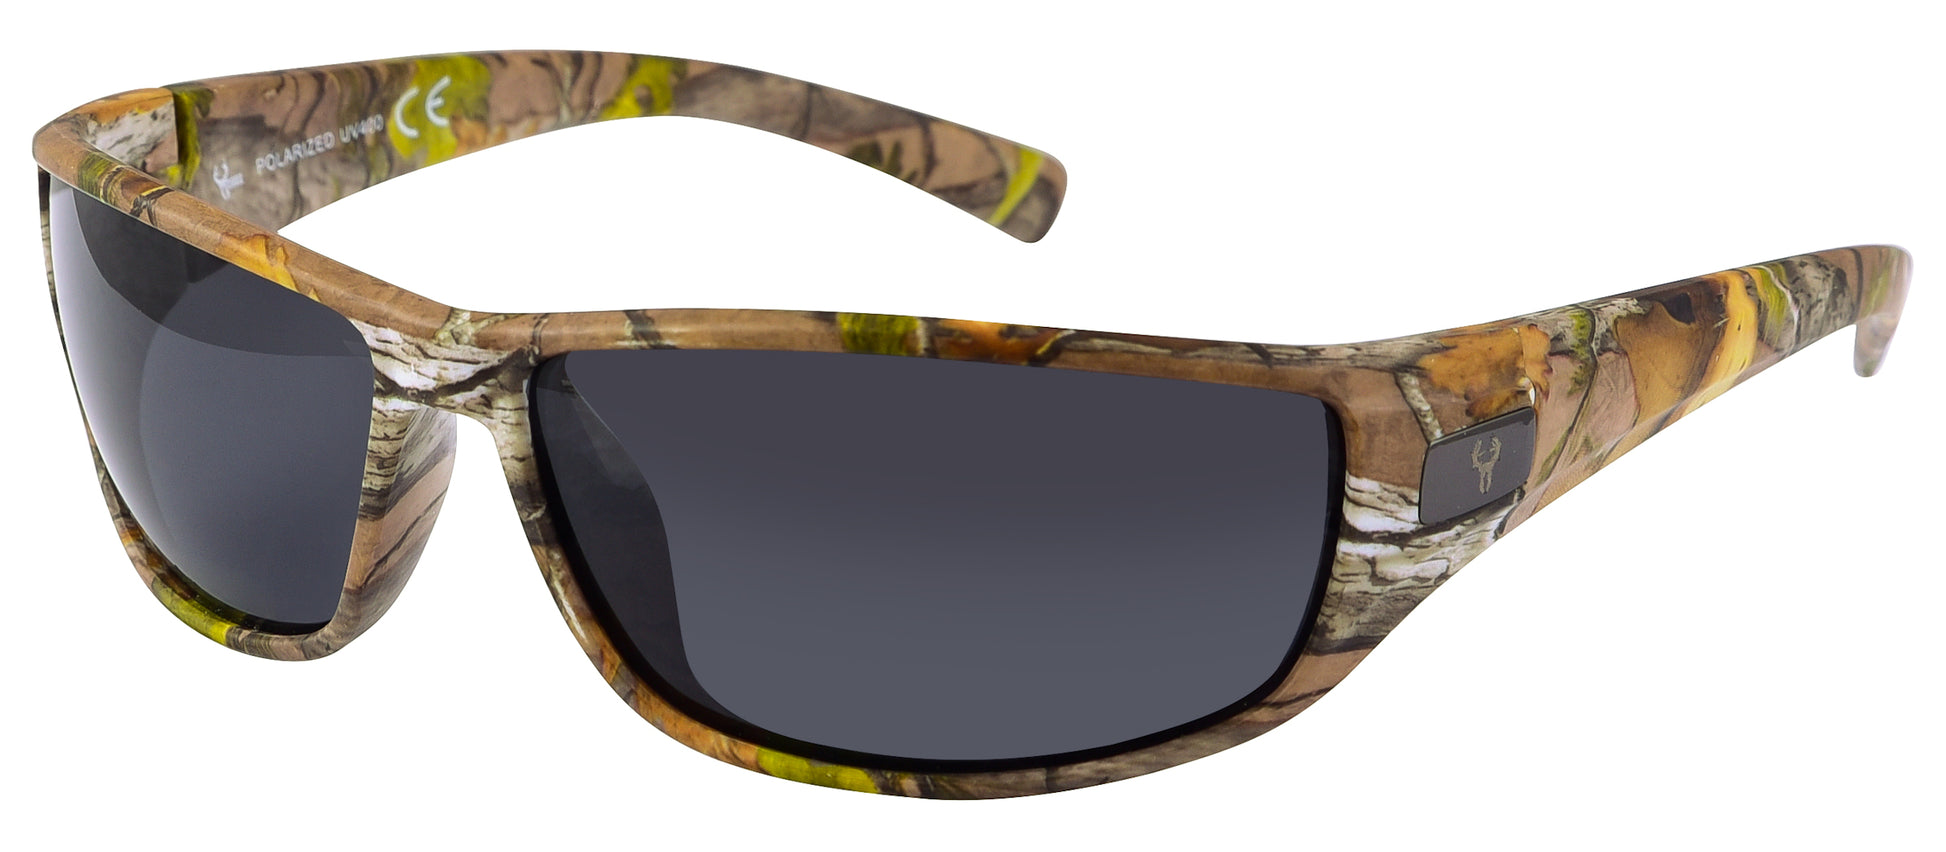 Free Country Men's Sunglasses with Microfiber Bag and Zippered